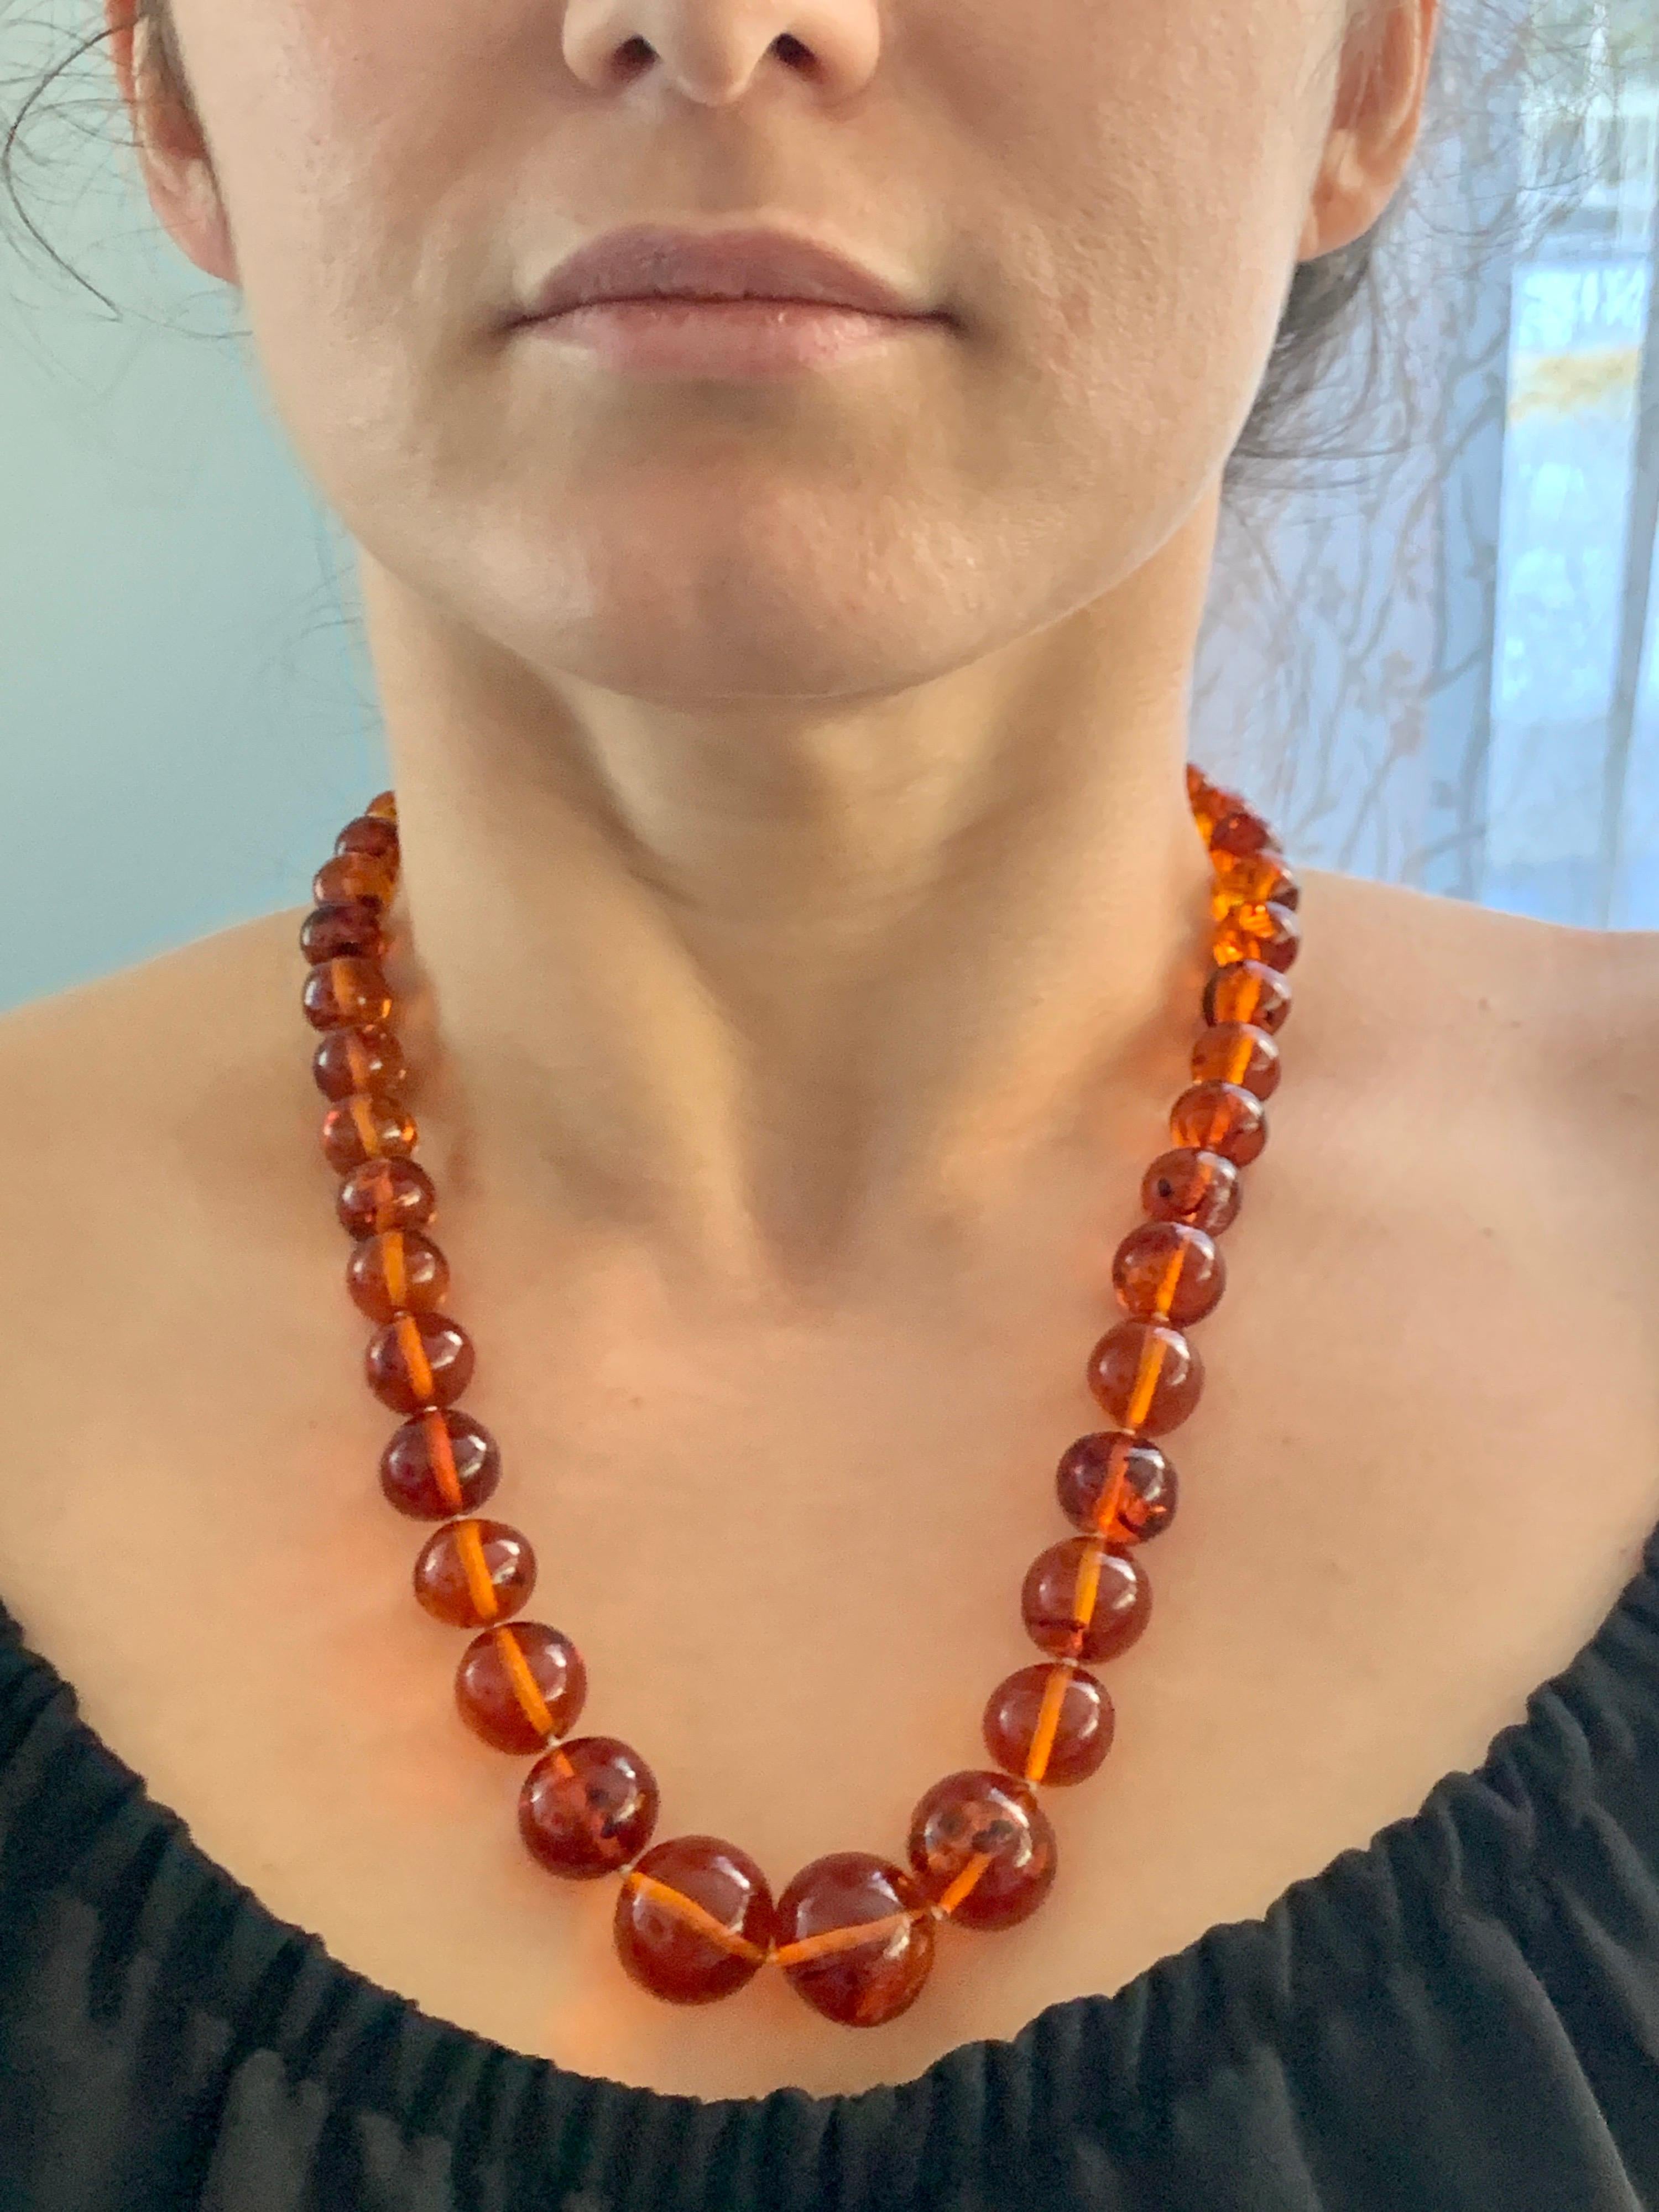 250 Ct Natural Amber Single Strand Graduating Bead Necklace with 18K Gold Clasp 10